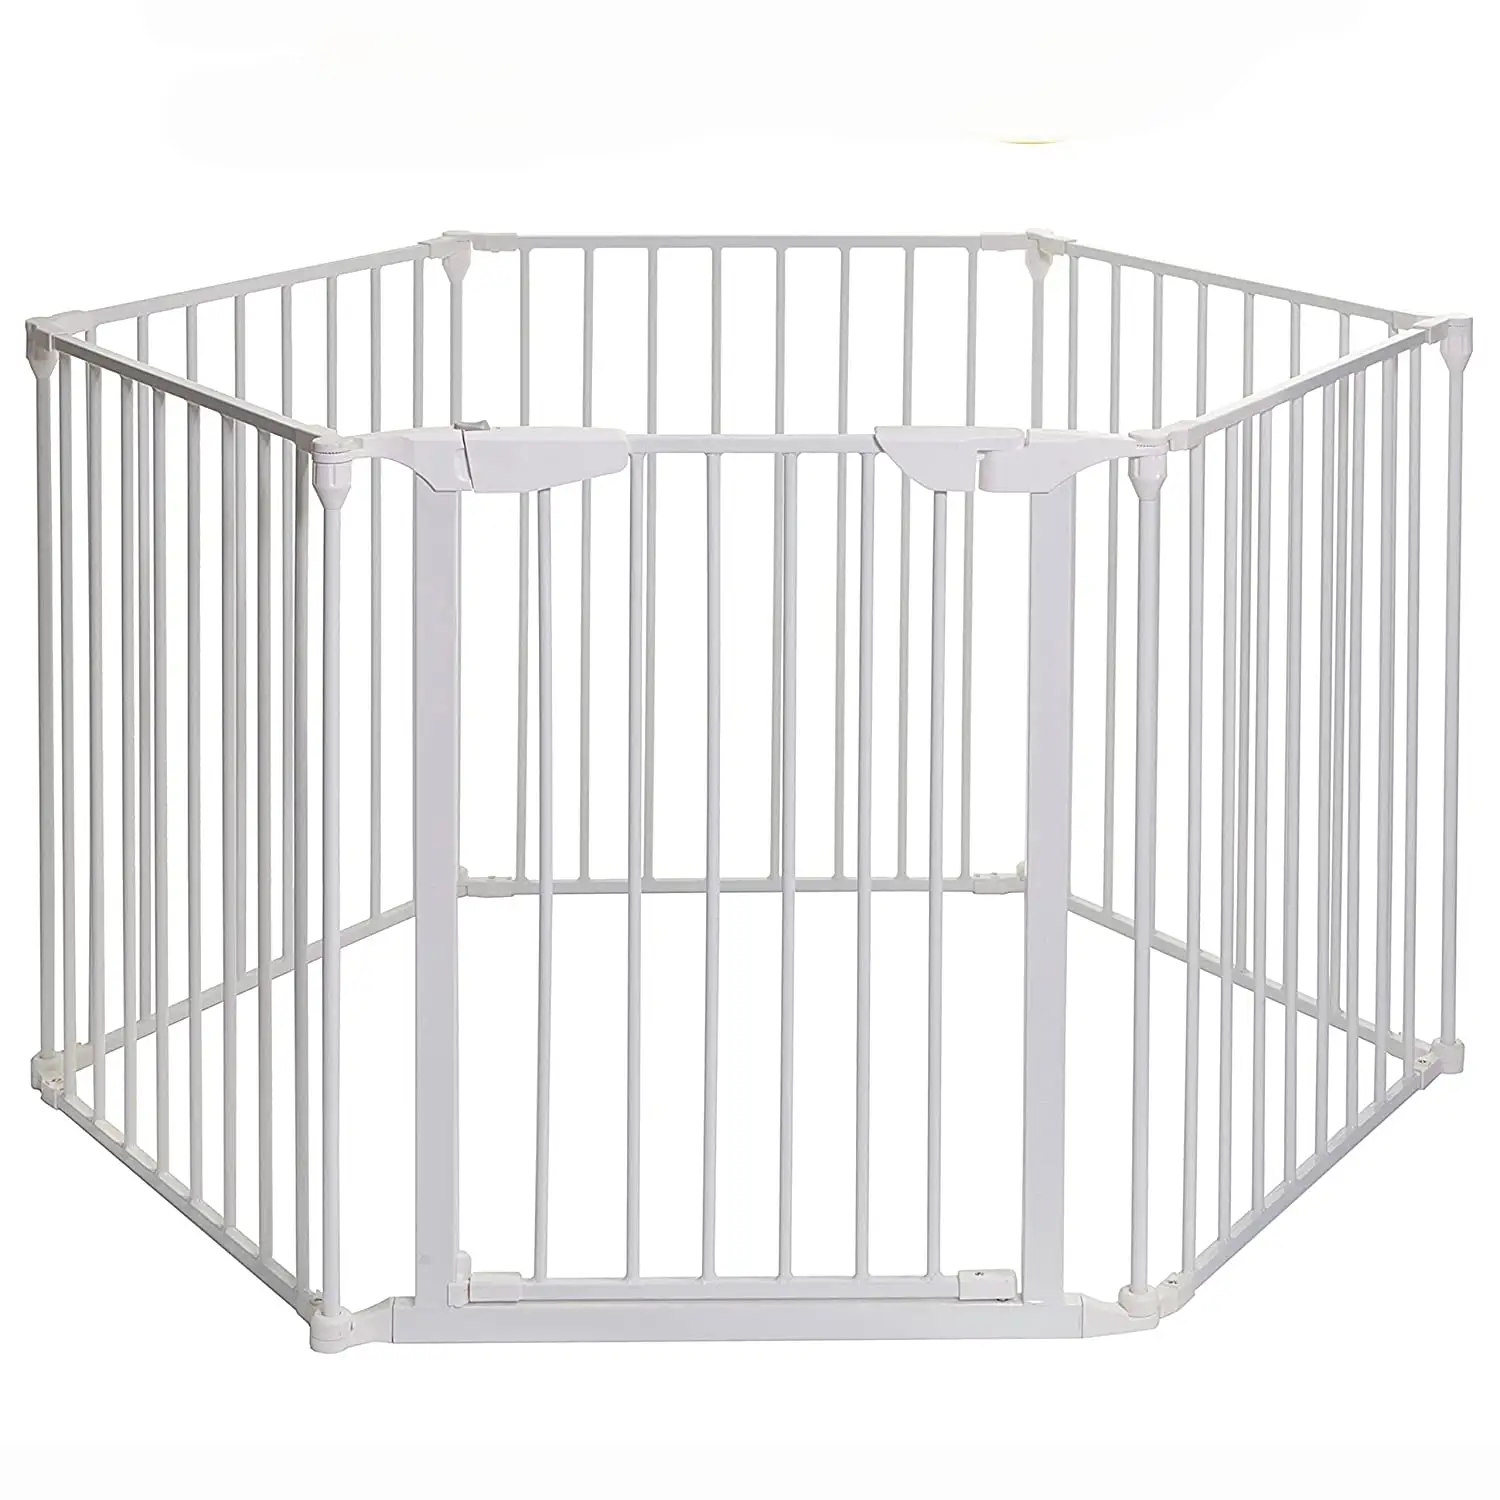 High Quality Hot Sale Baby Foldable Gate Playpen, Pet Gate for Stairs Doorway Auto Return Mayfair 3 in 1 Play-Pen 6 Panel Gate,